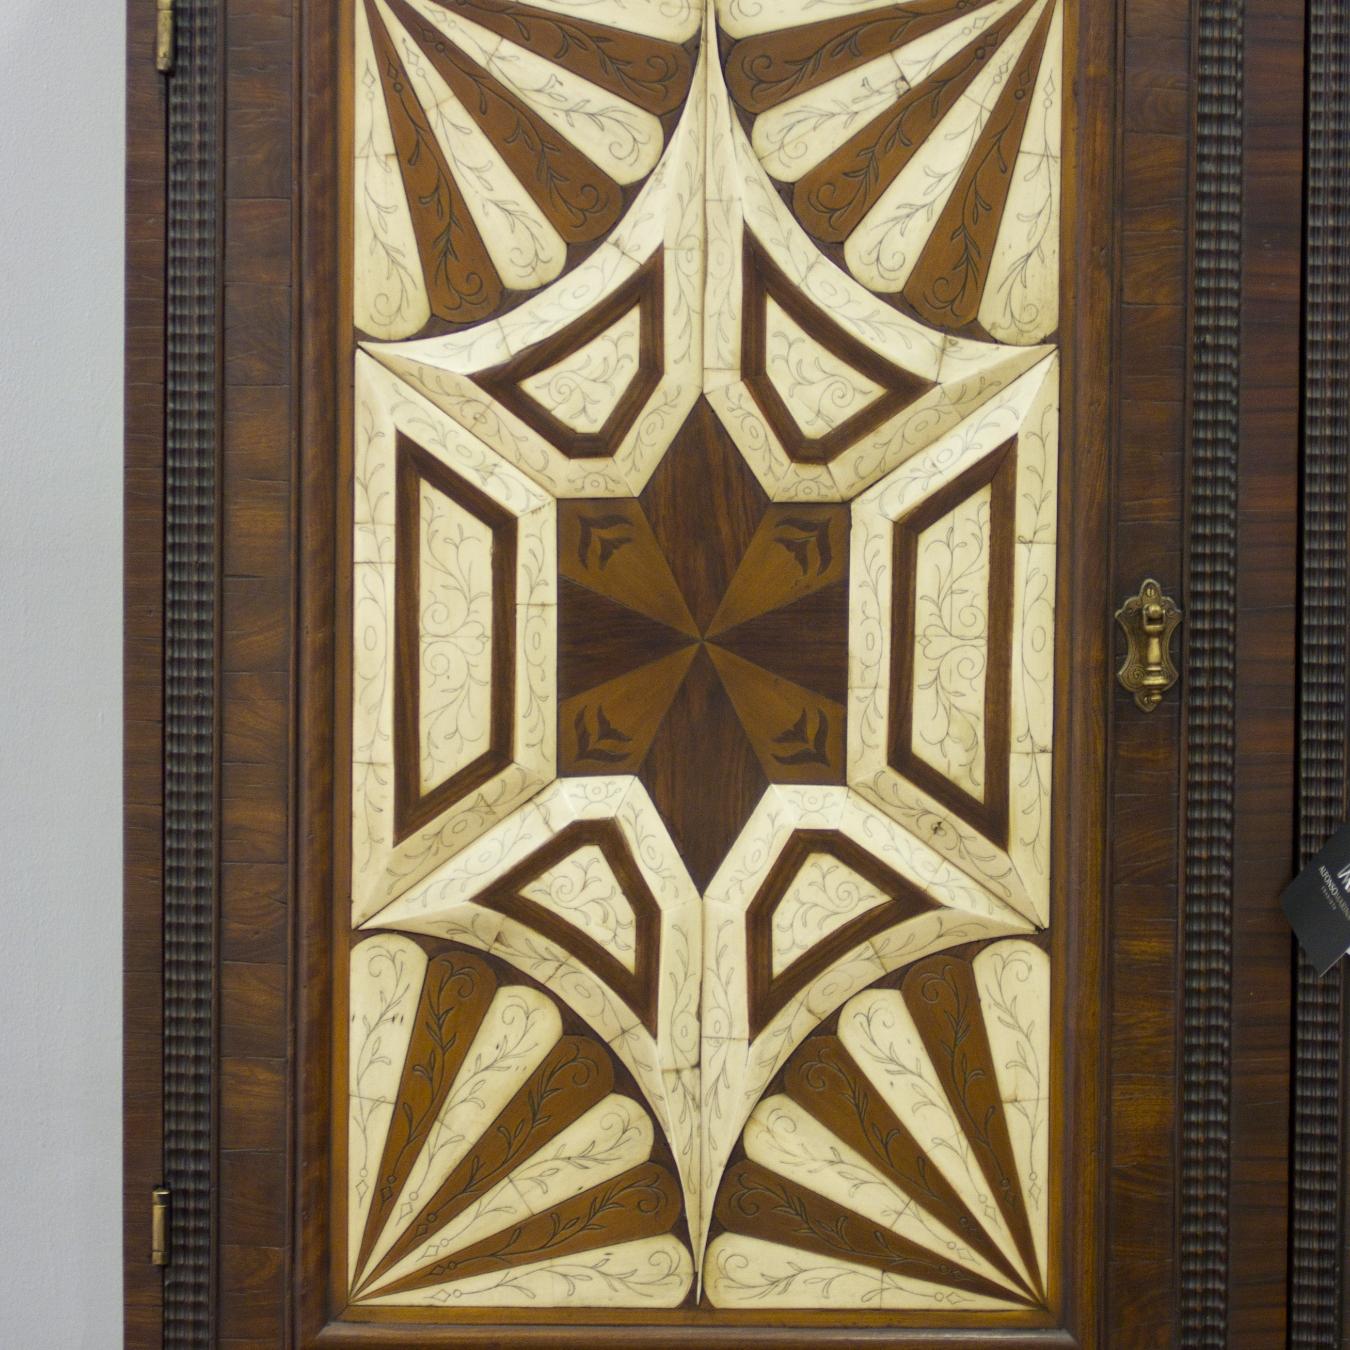 Mexican Early XVIII Century dutch and spanish inspired wood Toledo Armoire